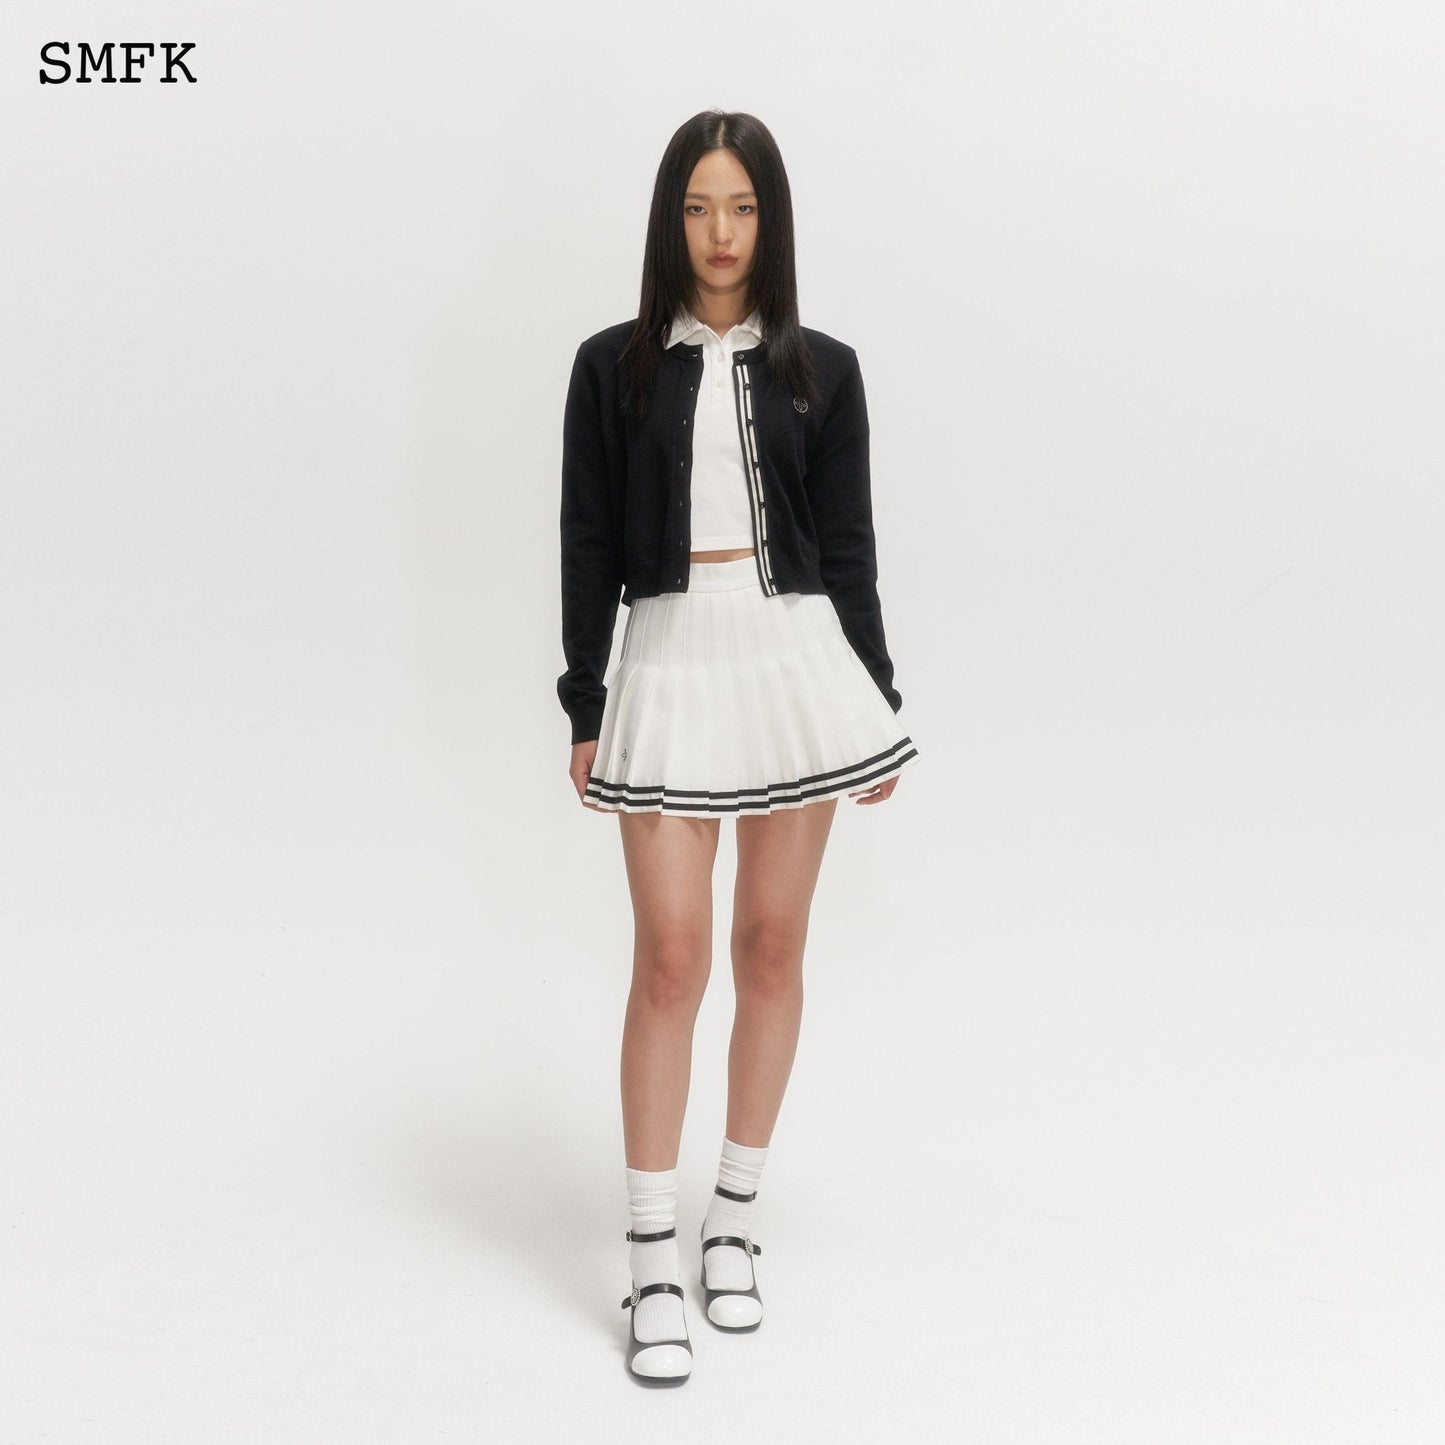 SMFK Compass Academy Black Knitted Cardigan